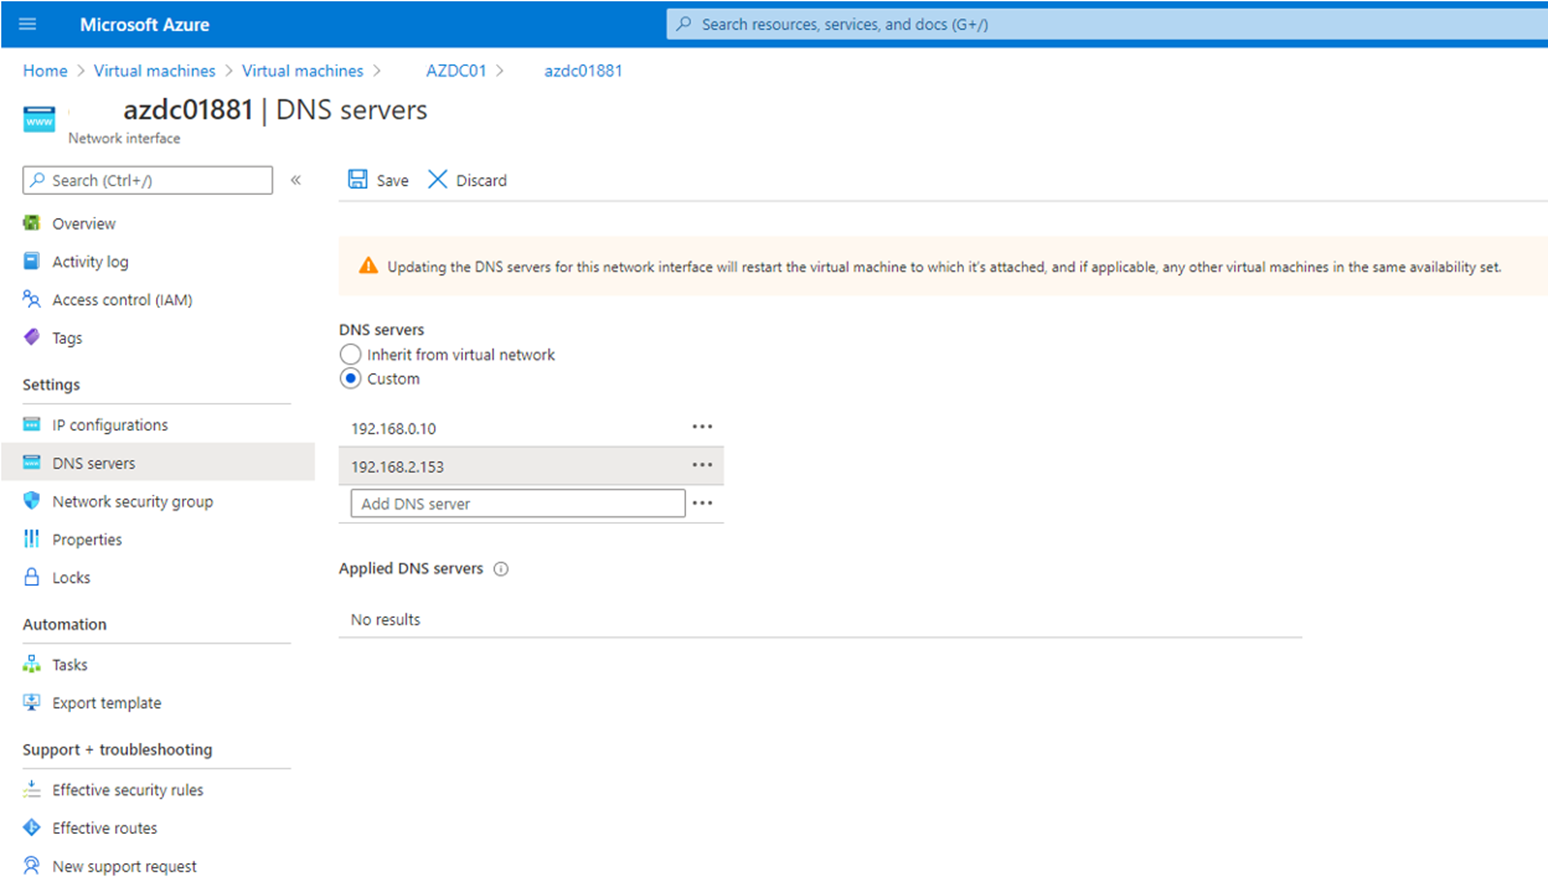 100120 0013 DeployaNewA16 - Deploy a New Active Directory Domain Controller Server at Azure